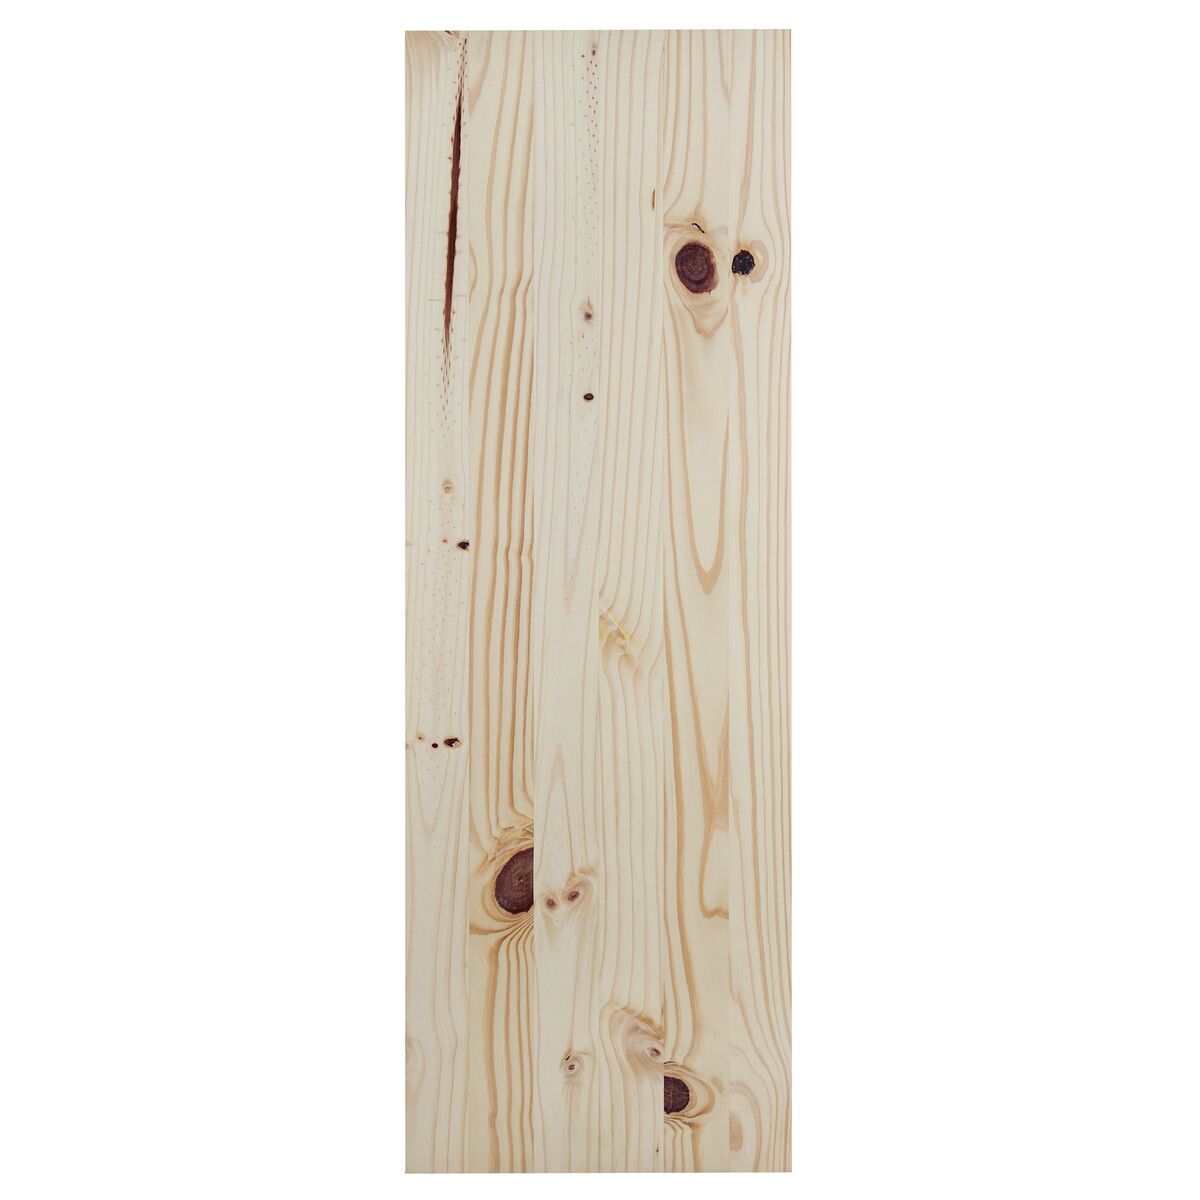 Tramontina Modulare CC 1200x800x25 mm Pine Wood Panel with a Natural Finish